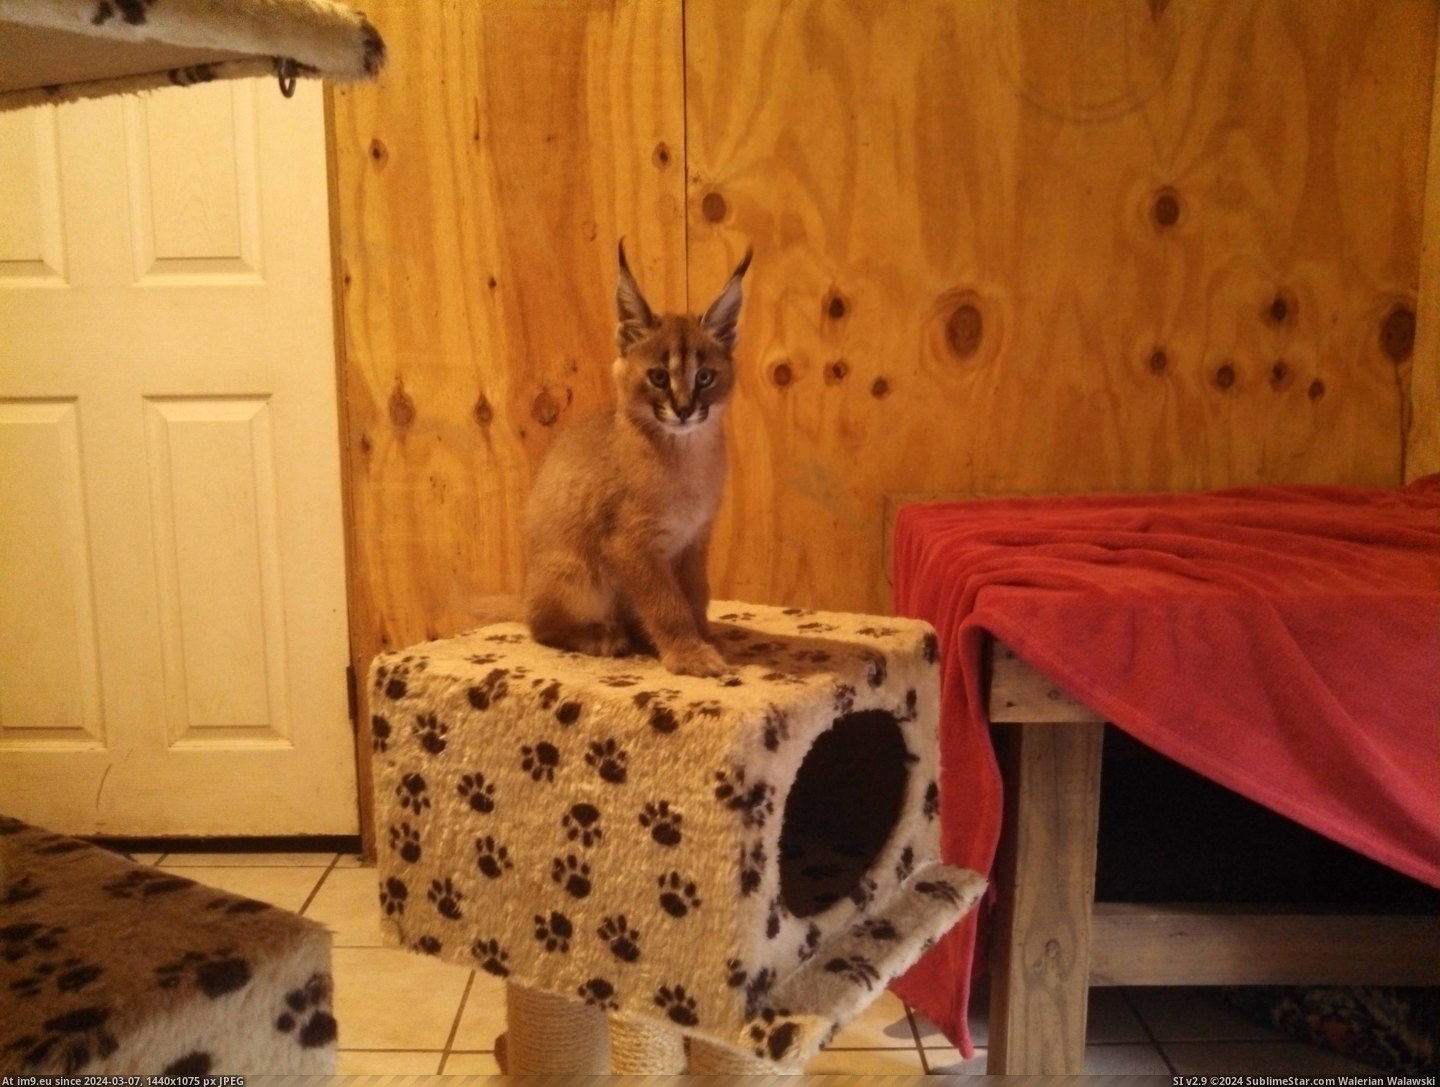 #For #Kitten #Caracal #Naja #Meet #Place [Aww] Is this the right place for a caracal kitten? Meet Naja. Pic. (Image of album My r/AWW favs))